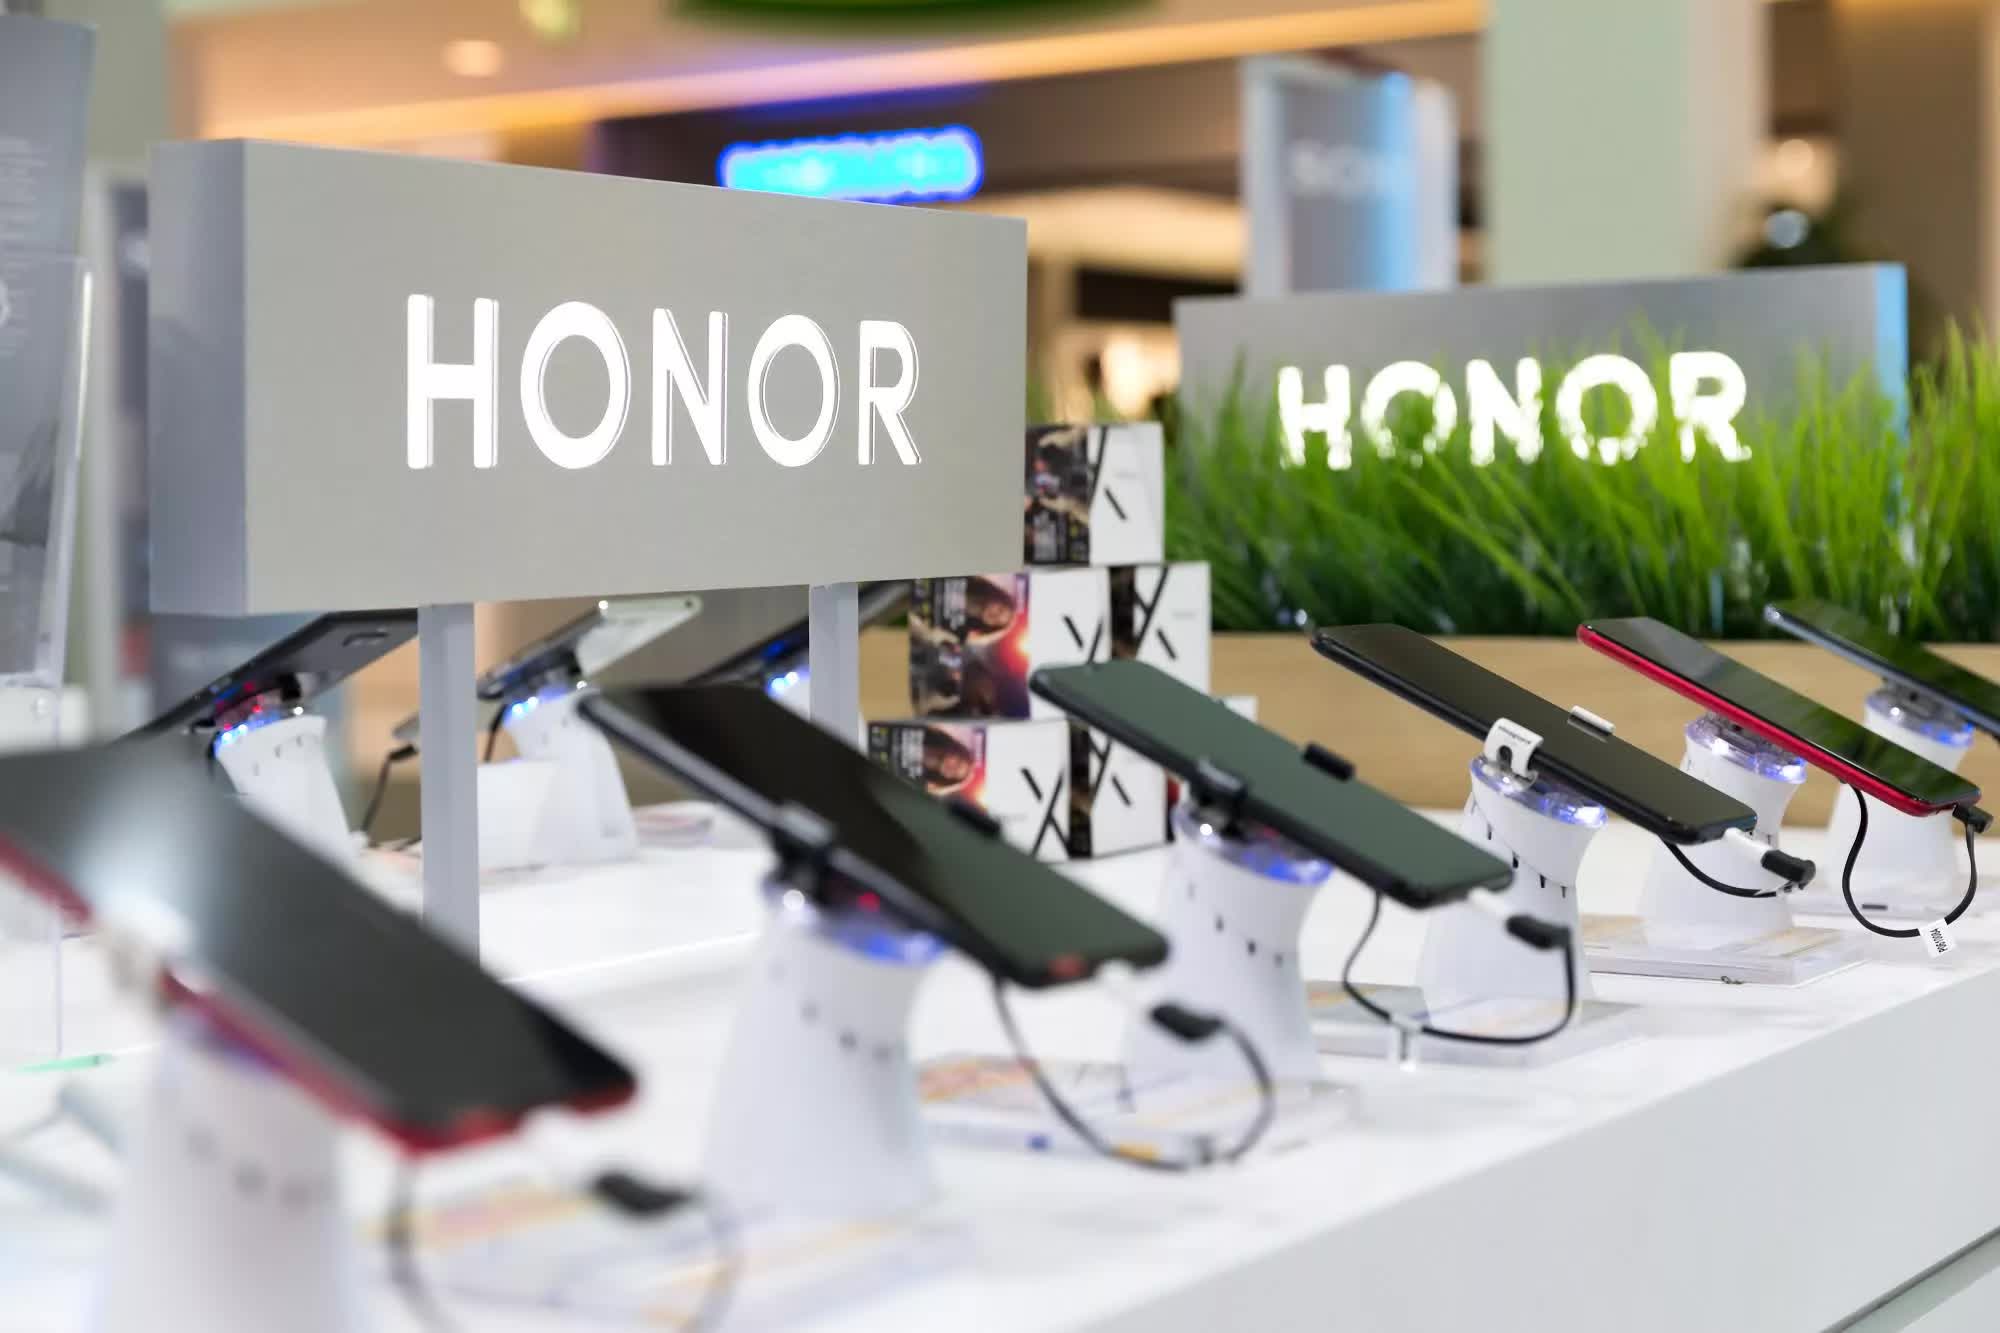 Honor secures partnerships with suppliers after being sold by Huawei